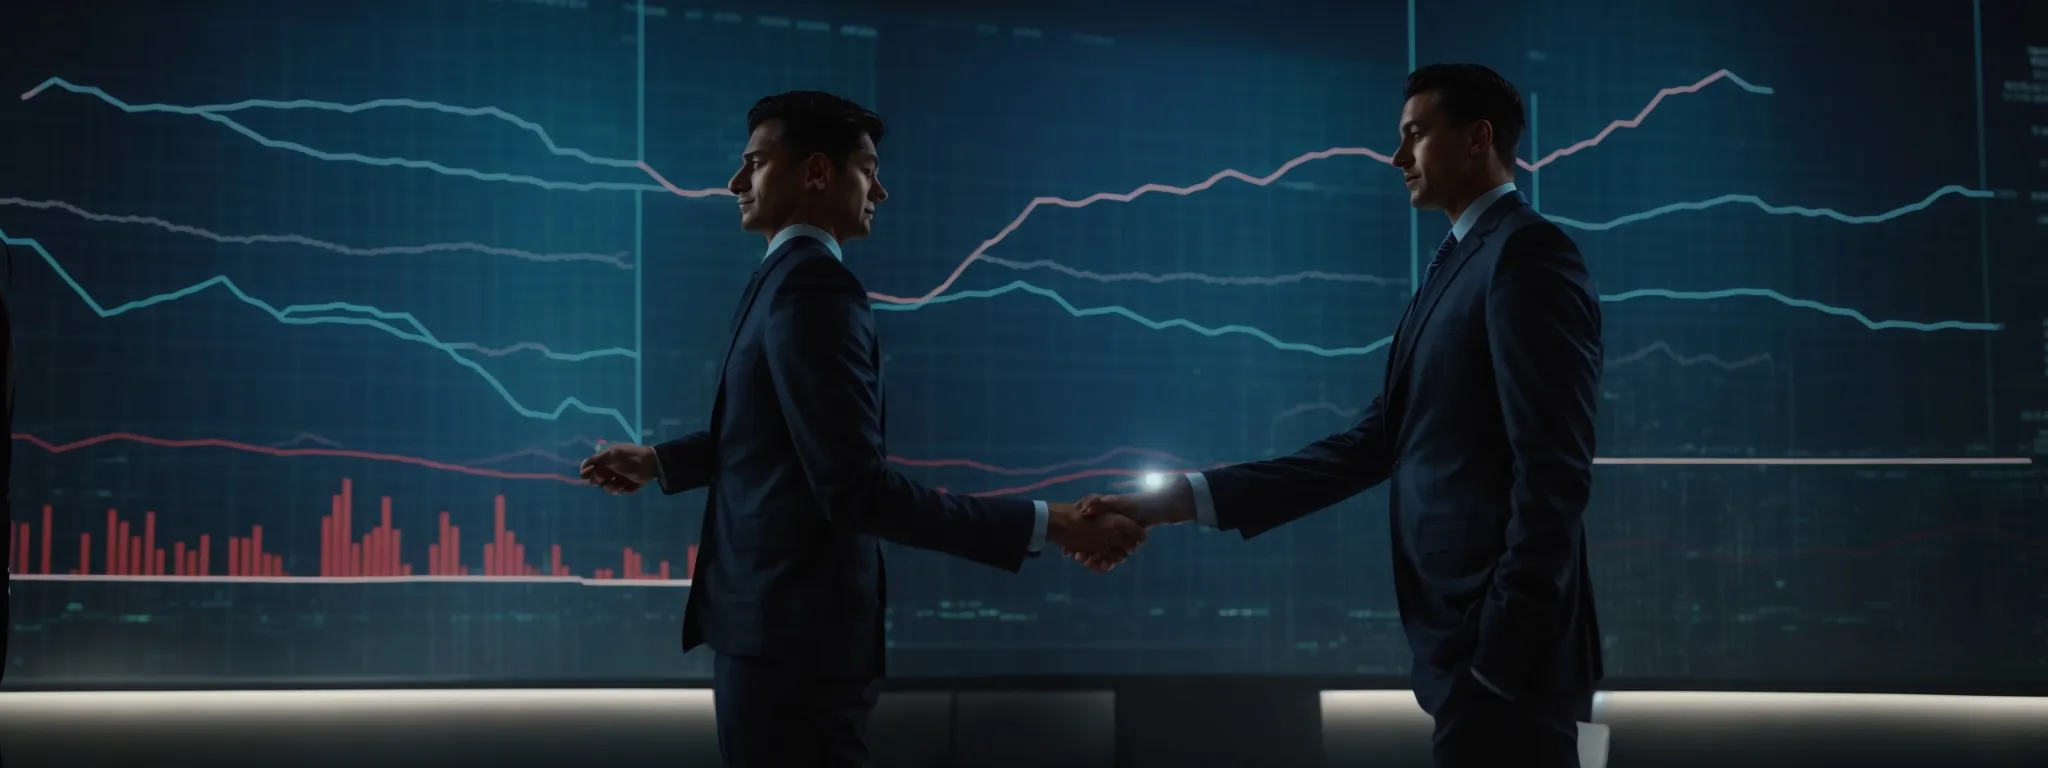 two corporate executives shaking hands in front of a large digital screen displaying bar graphs trend upward, symbolizing strategic growth.